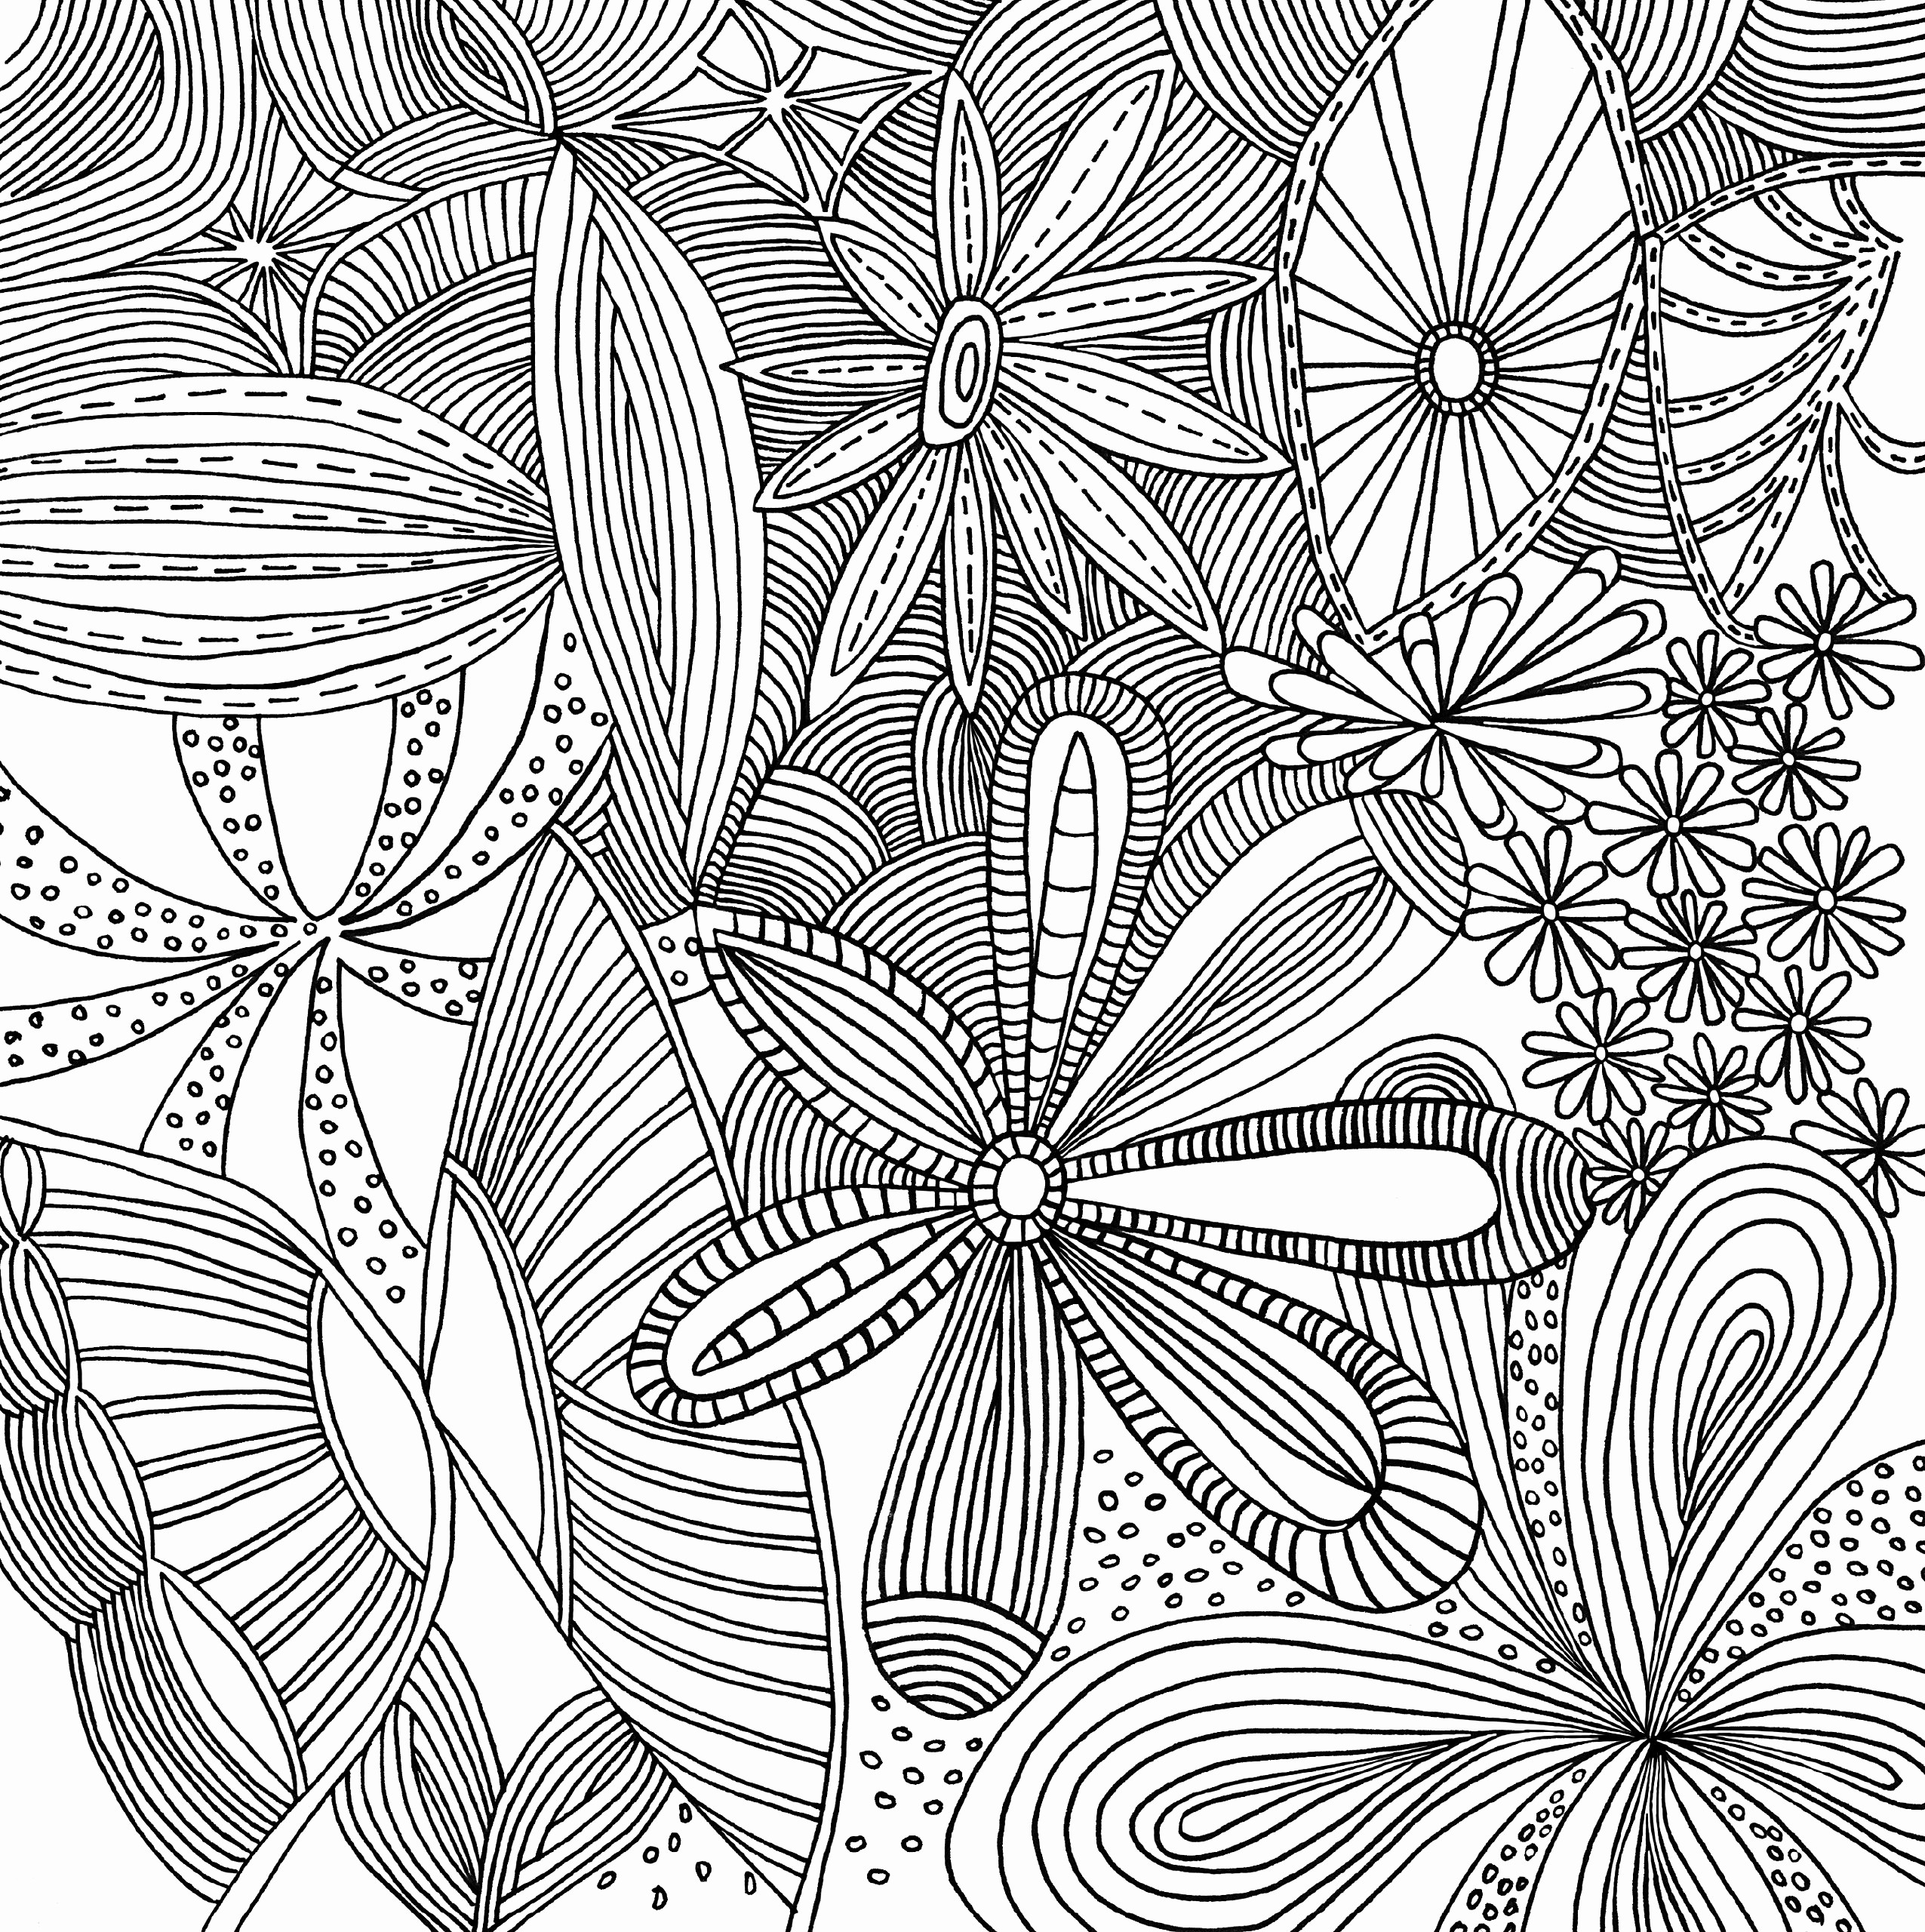 make-coloring-pages-from-photos-at-getdrawings-free-download